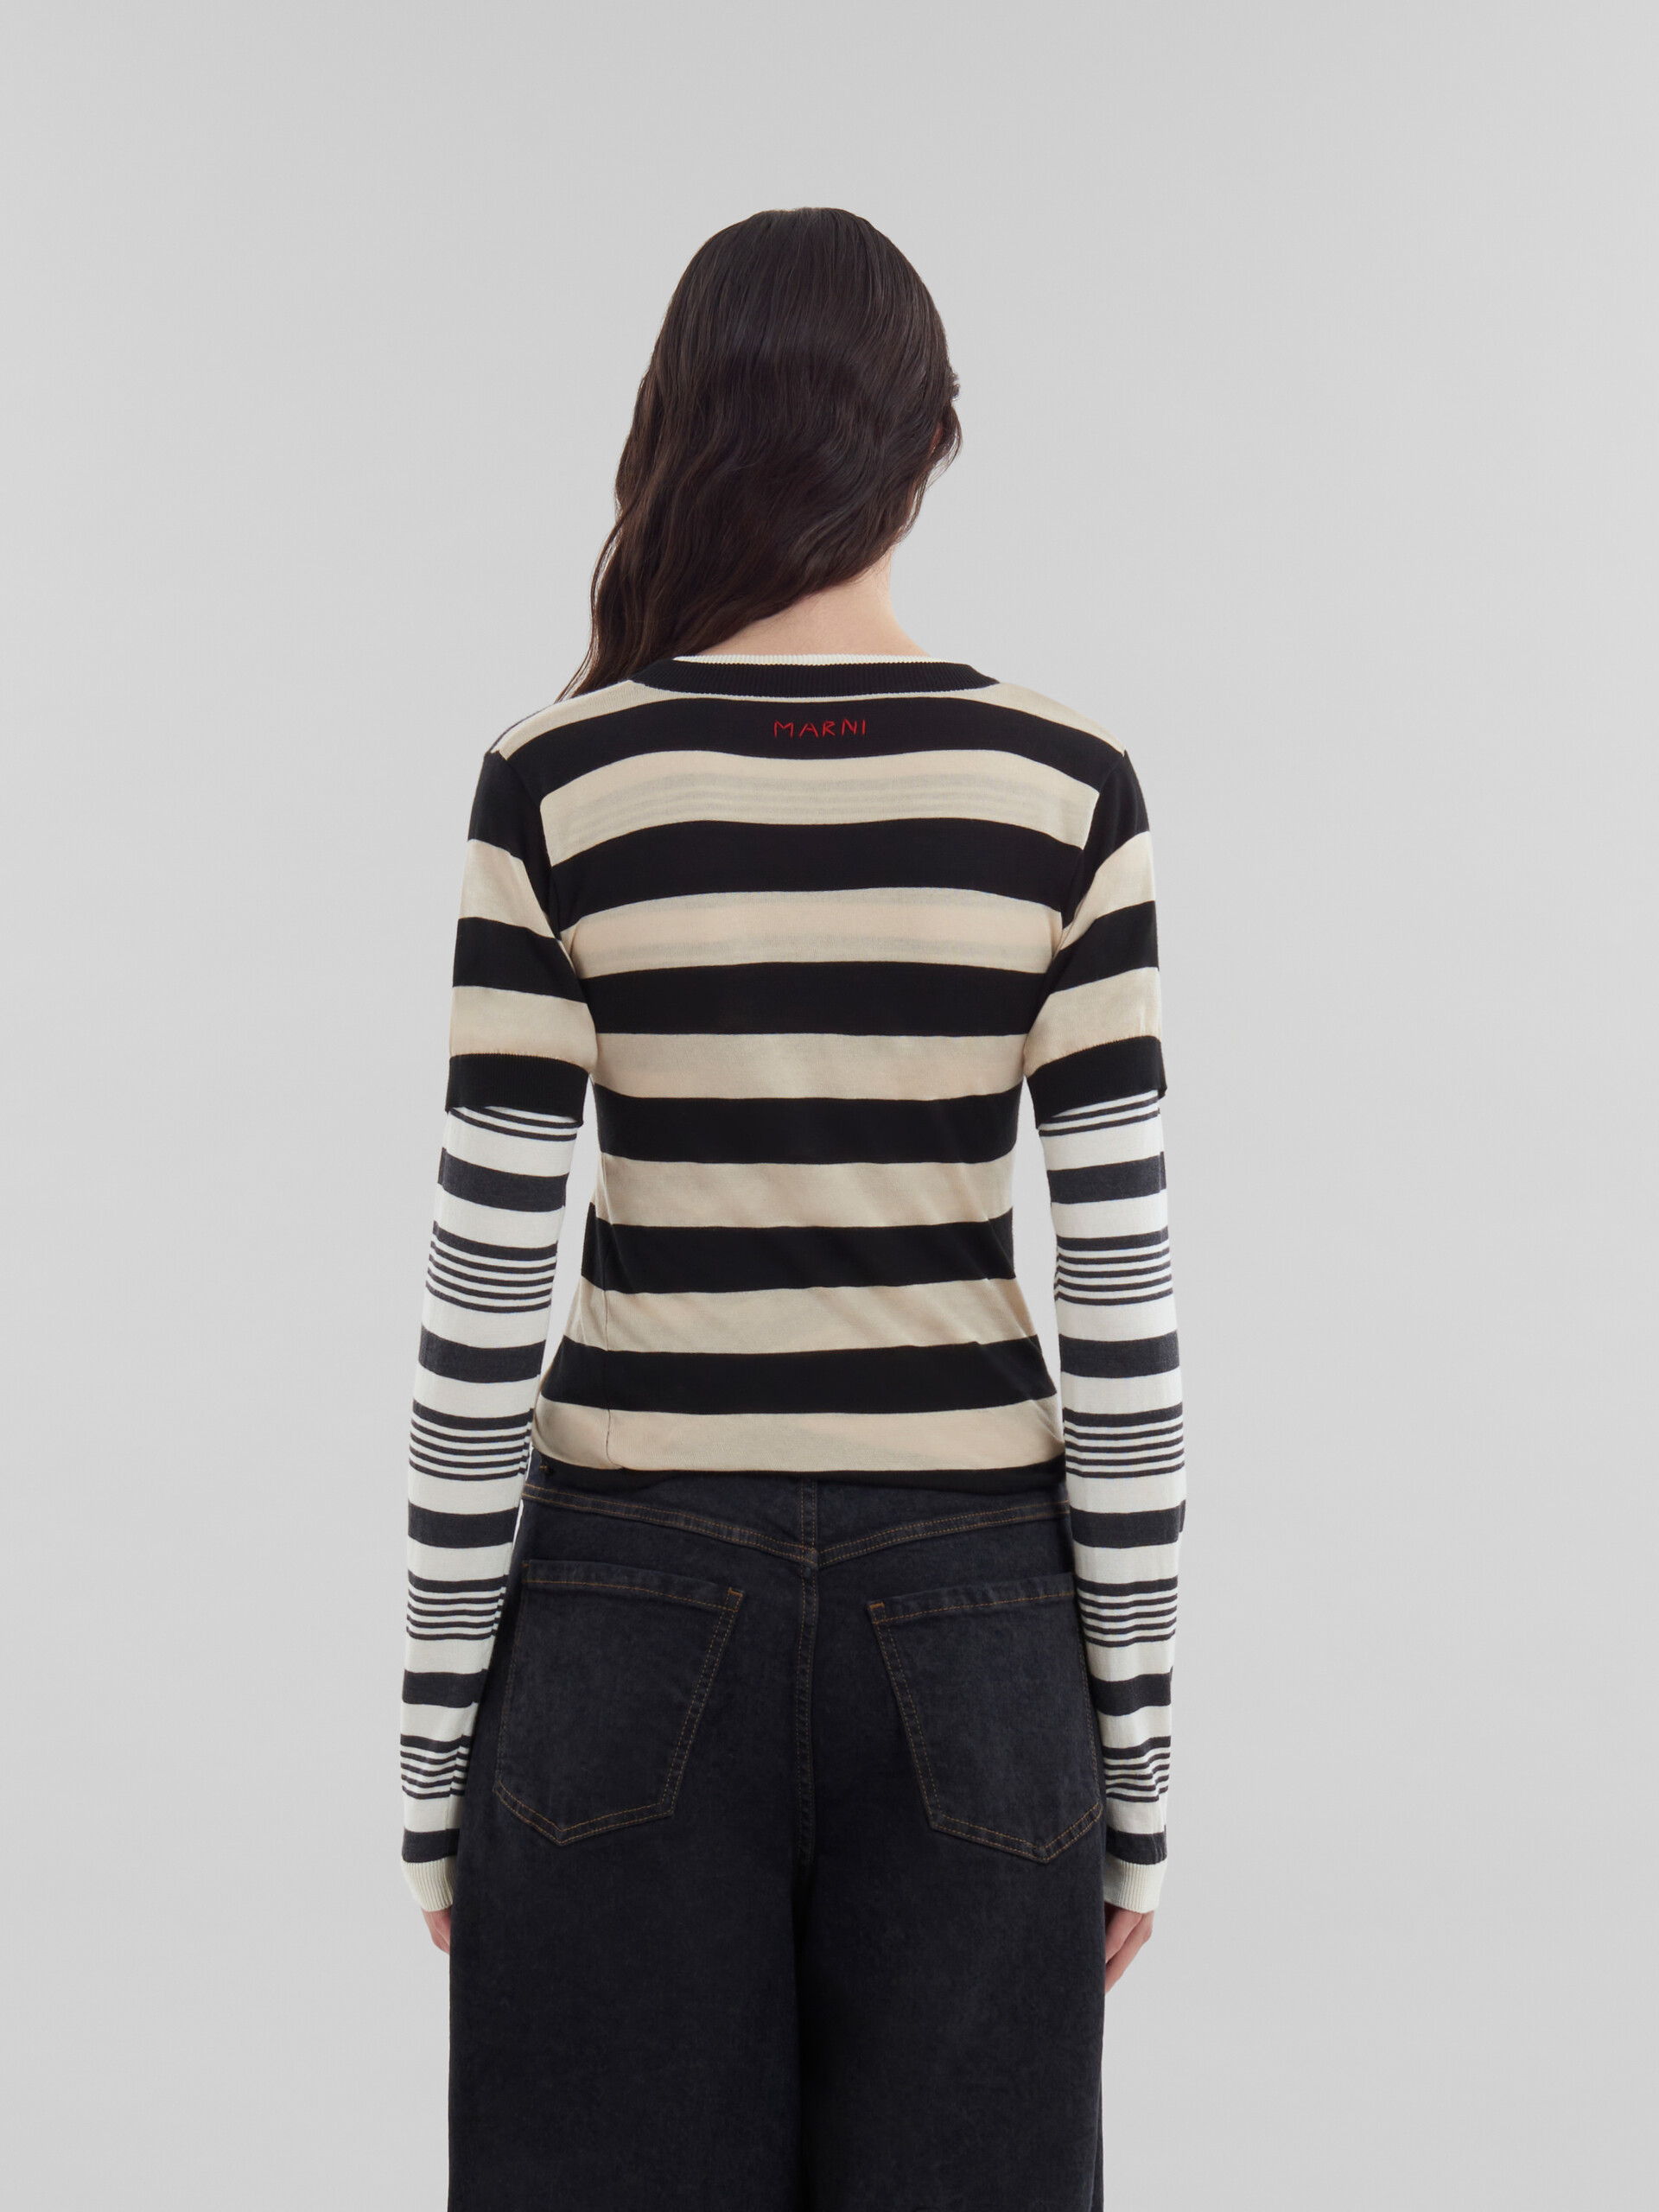 Black and white layered cotton crew-neck with contrast stripes - Pullovers - Image 3